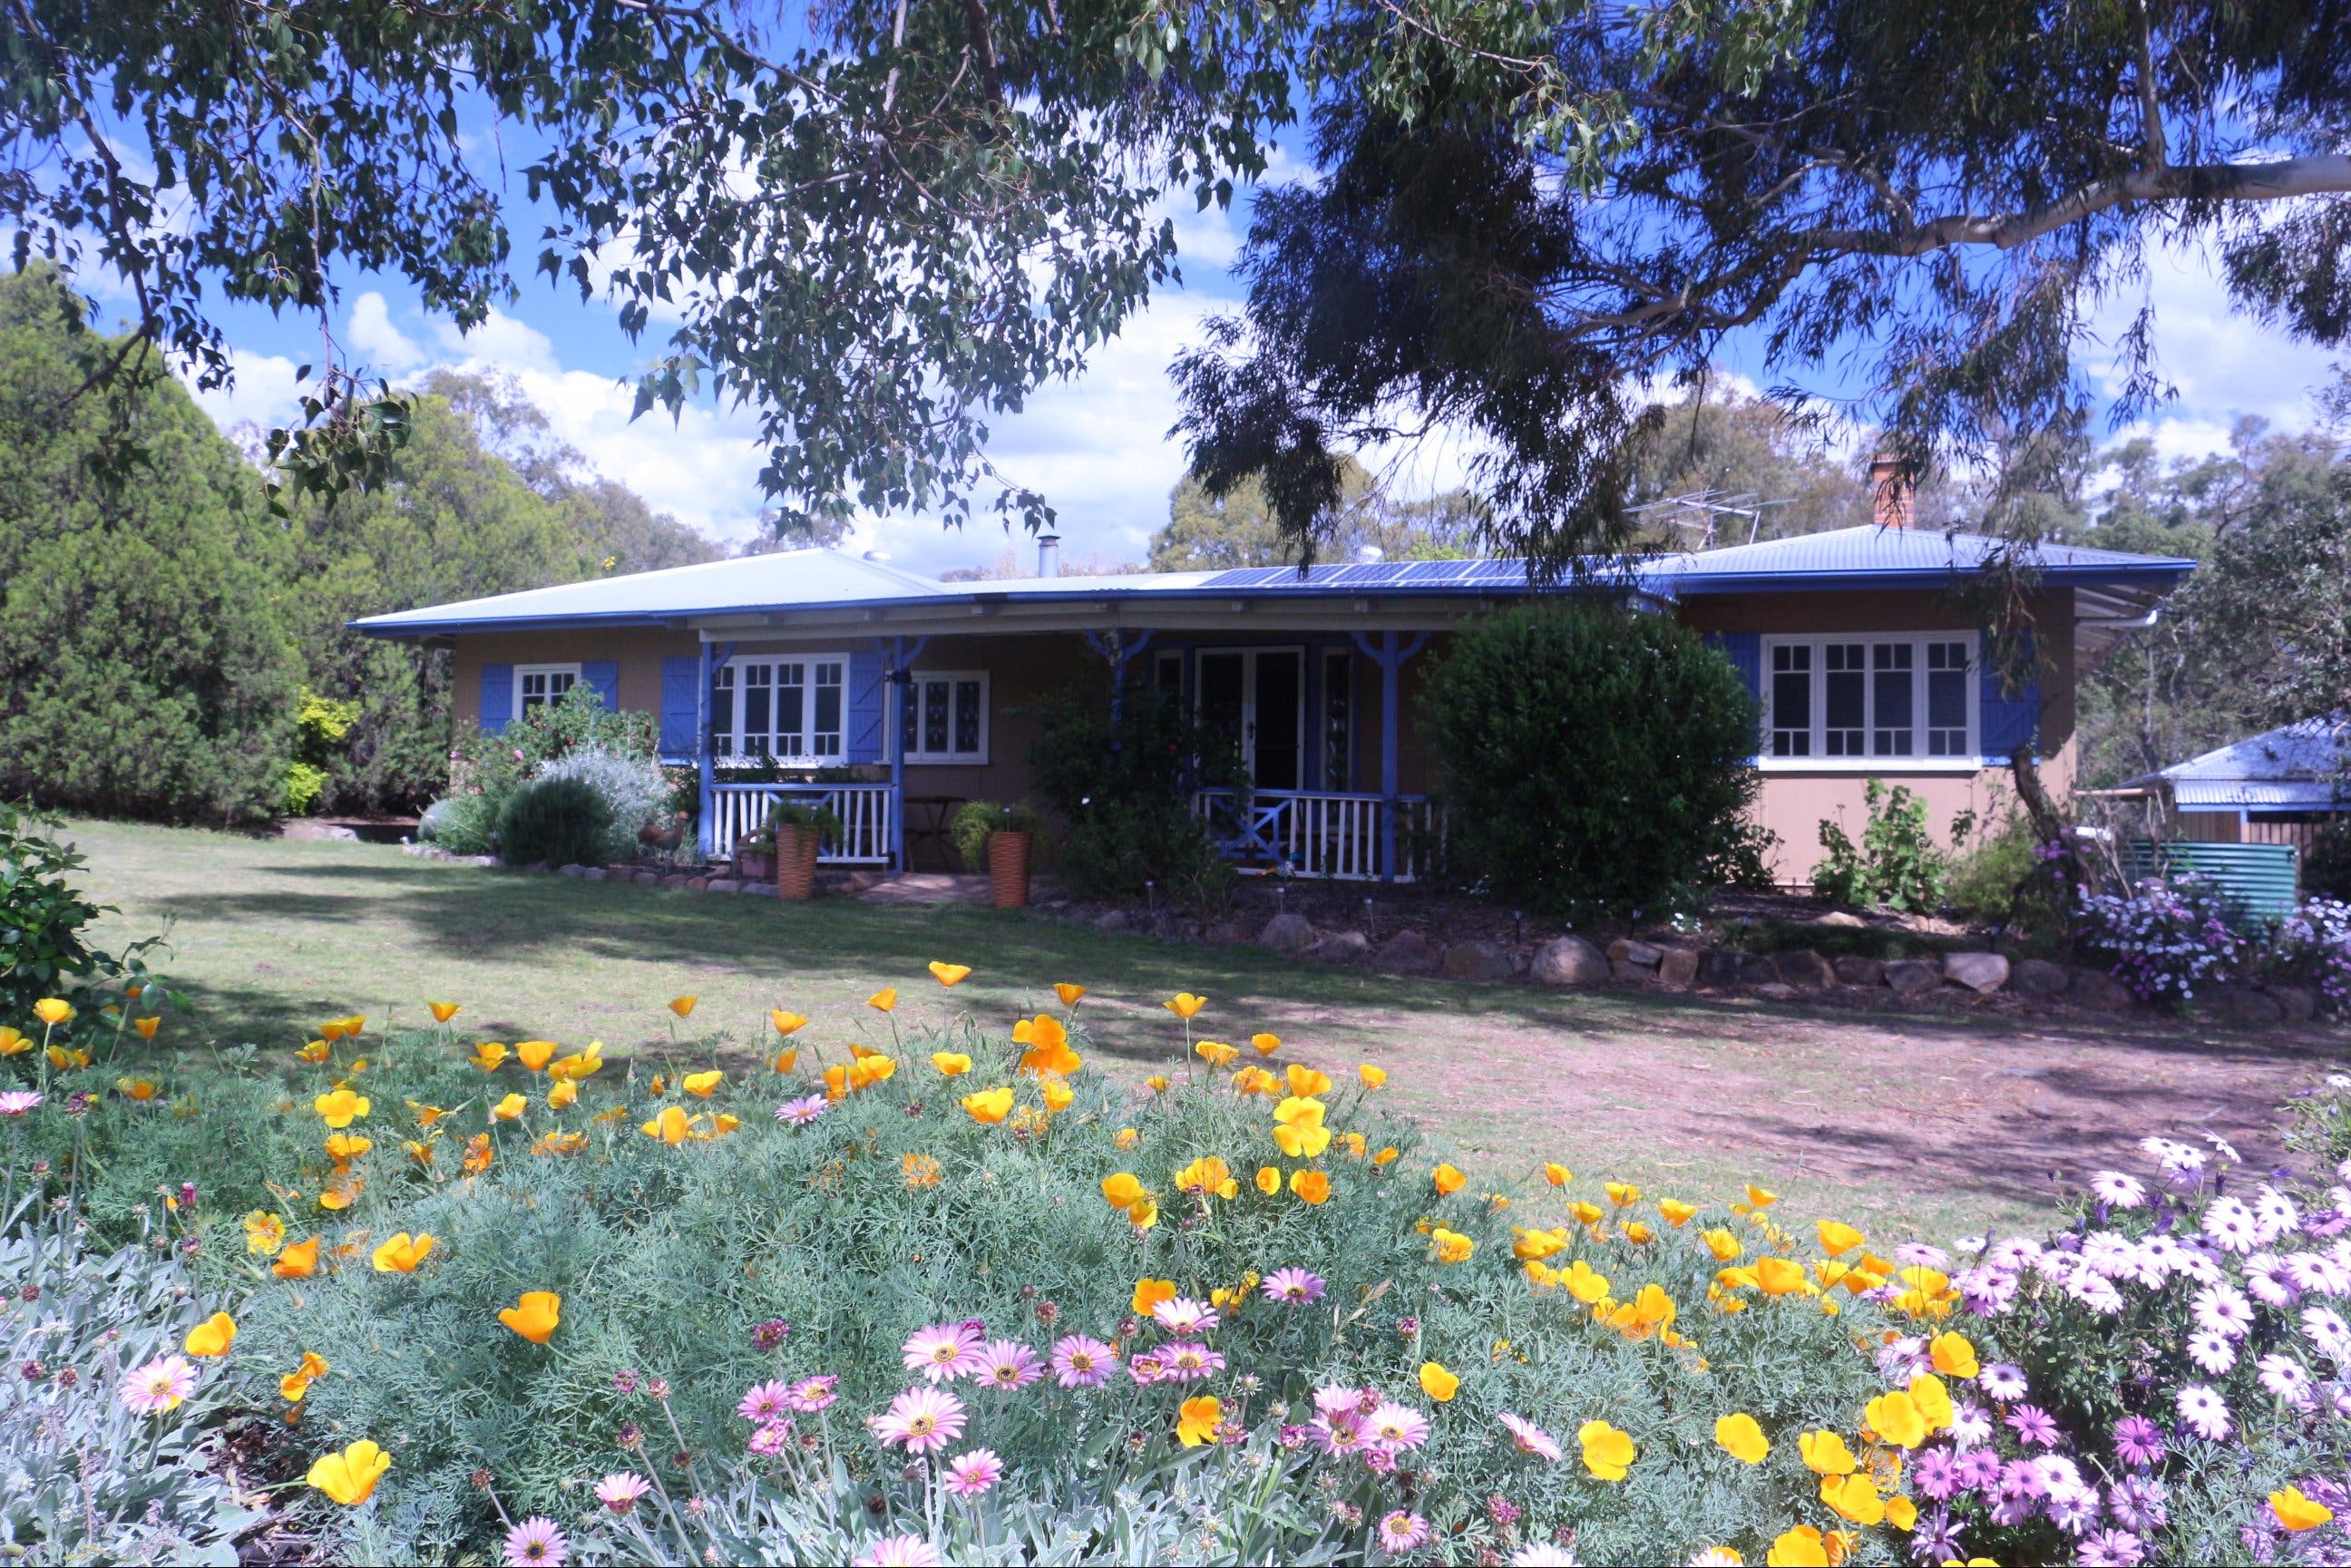 A Stanthorpe Getaway - Coogee Beach Accommodation